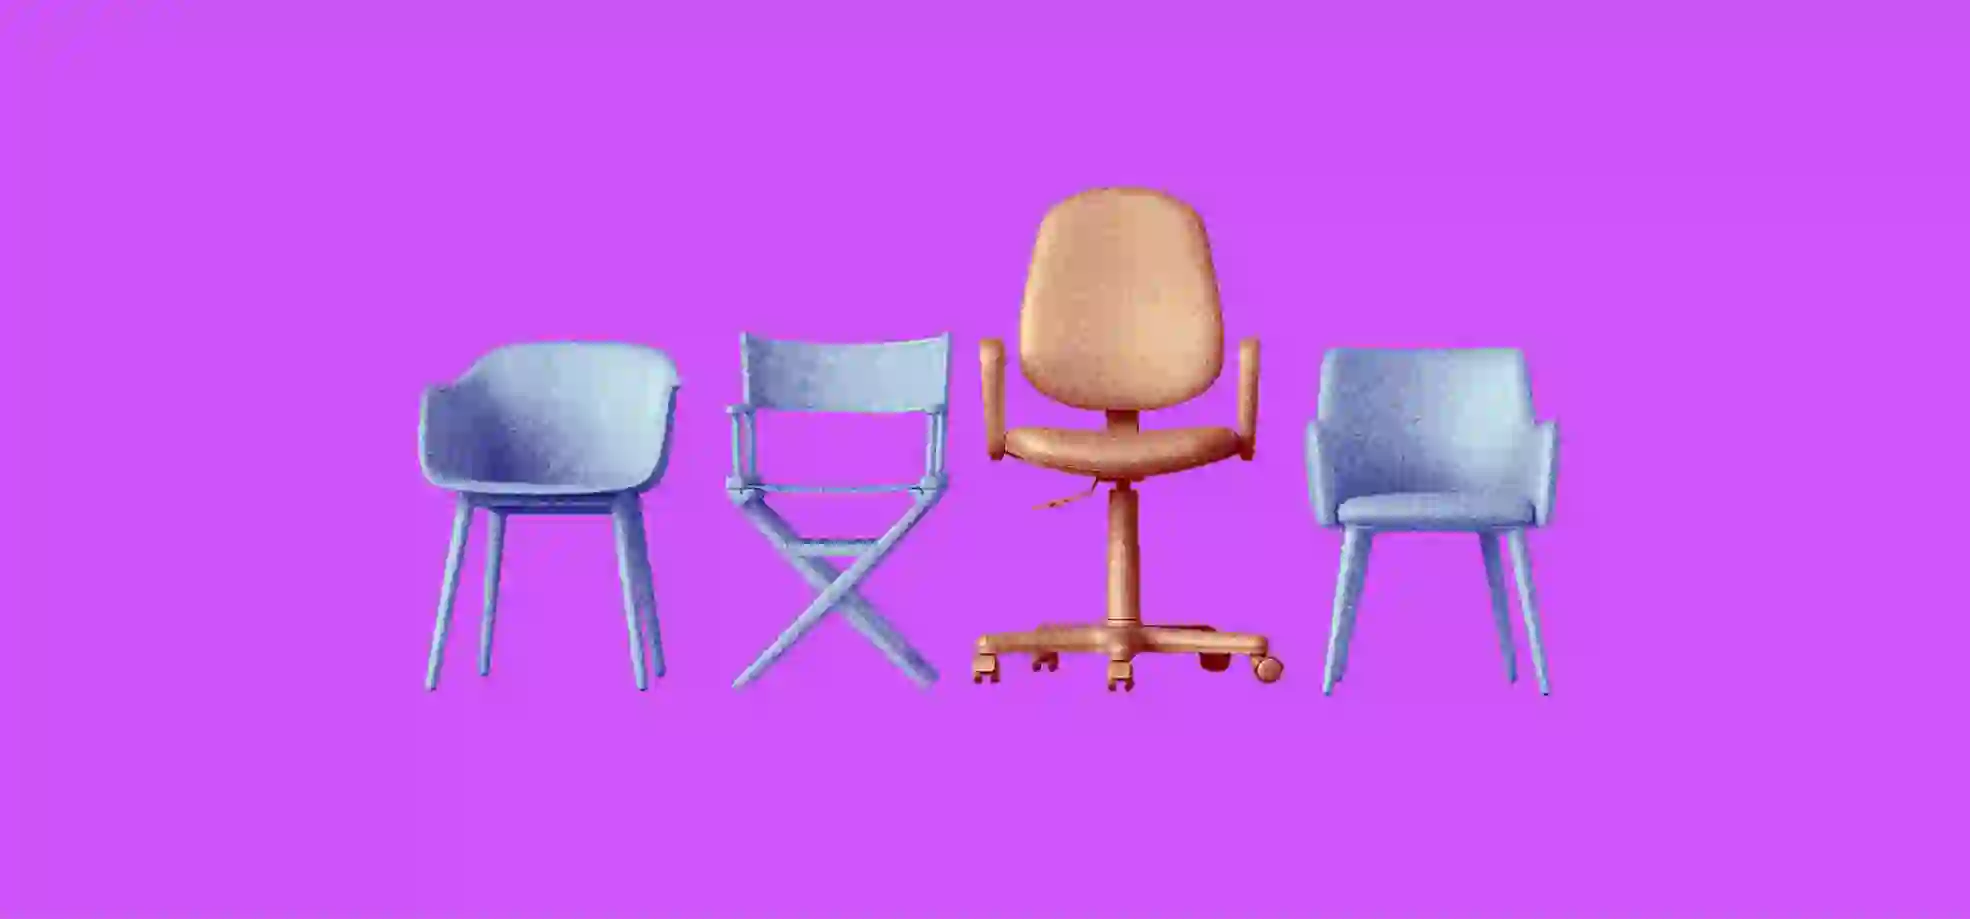 illustration of 4 office chairs on a purple background